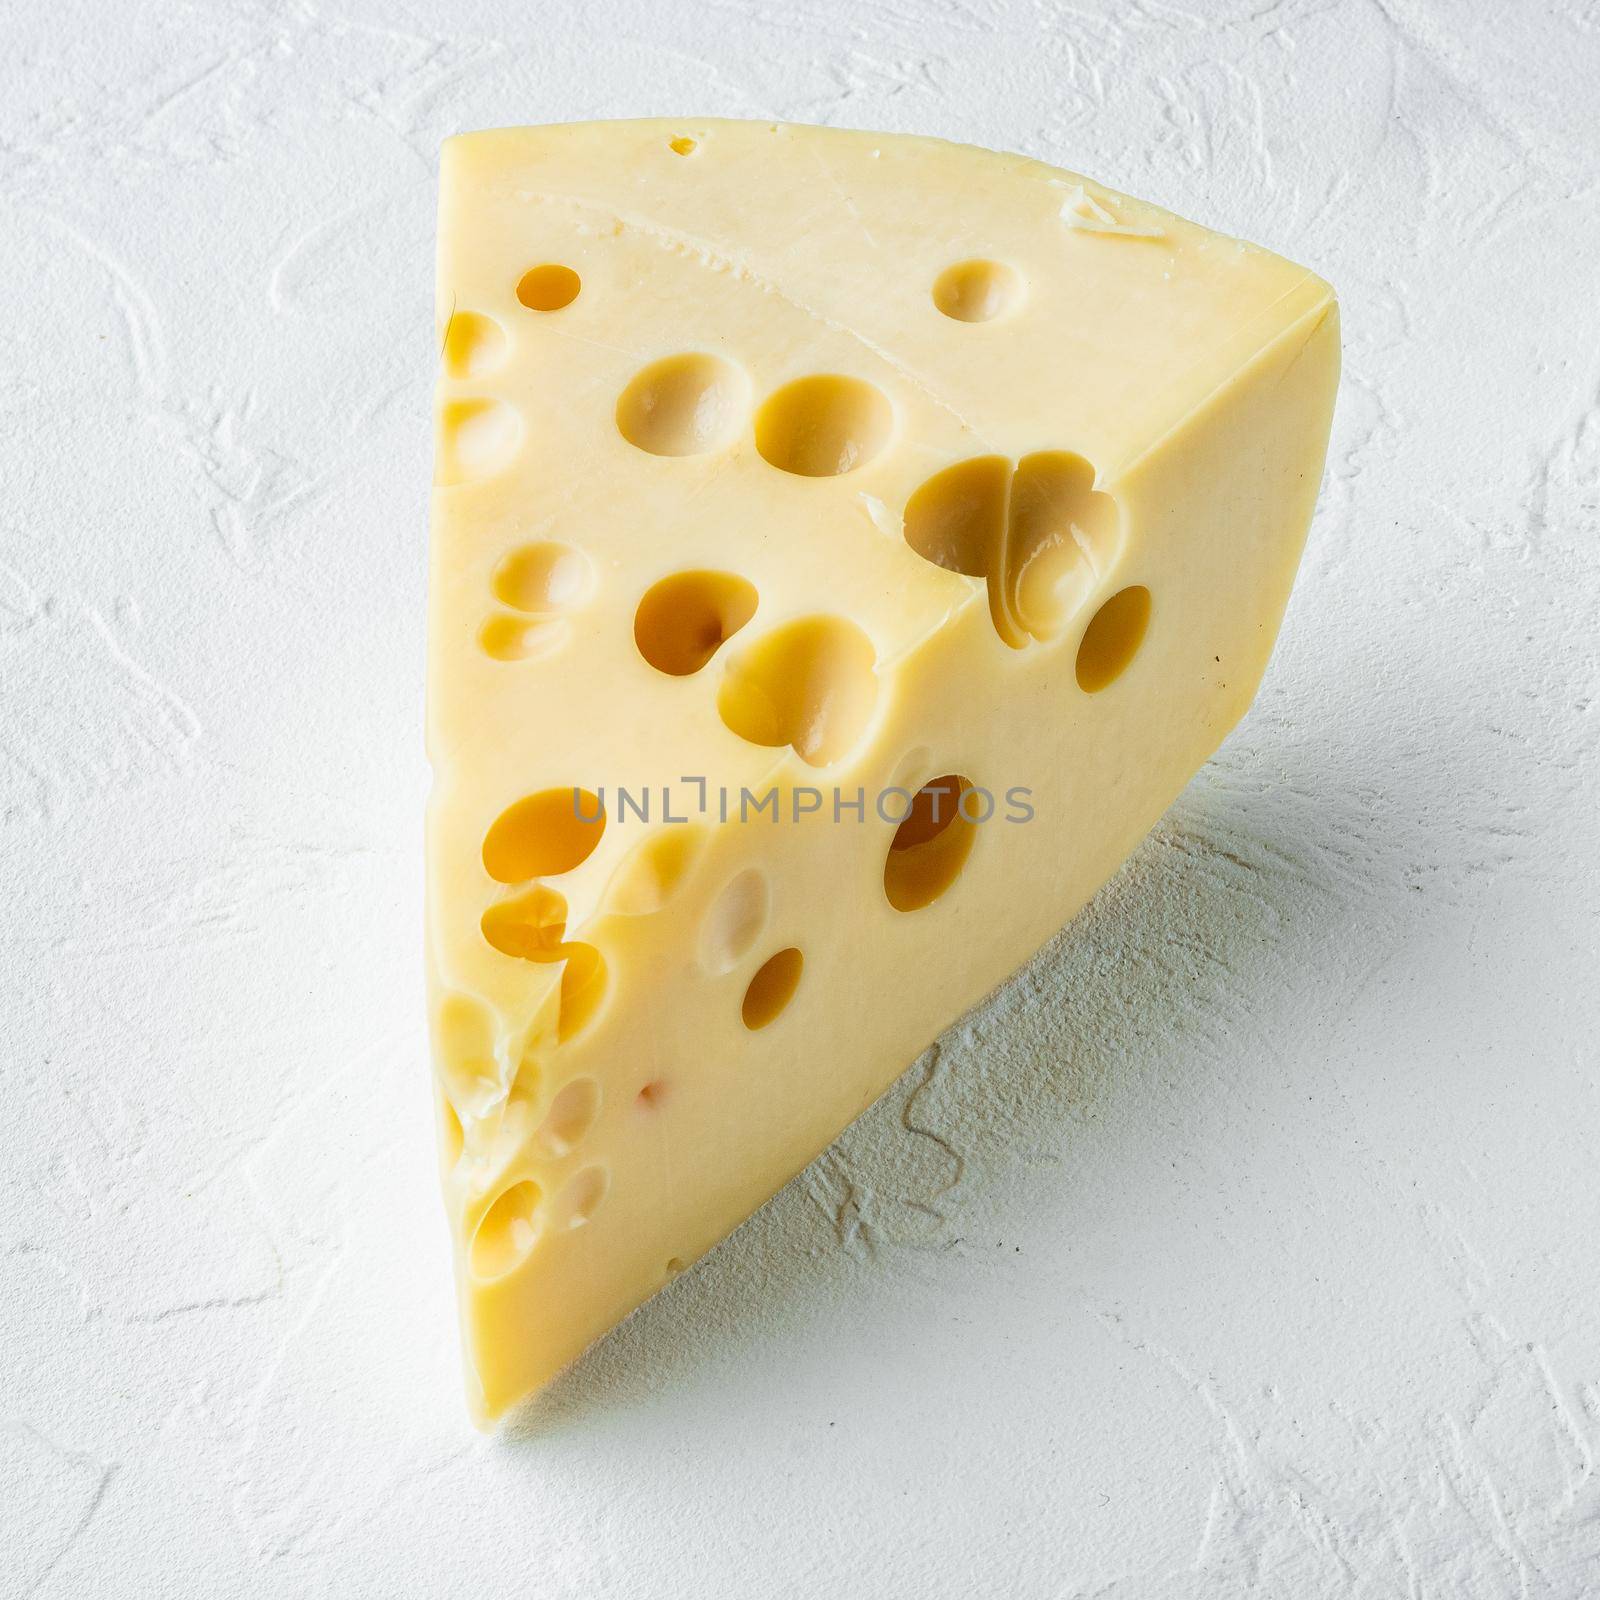 Maasdam cheese, on white stone surface, square format by Ilianesolenyi